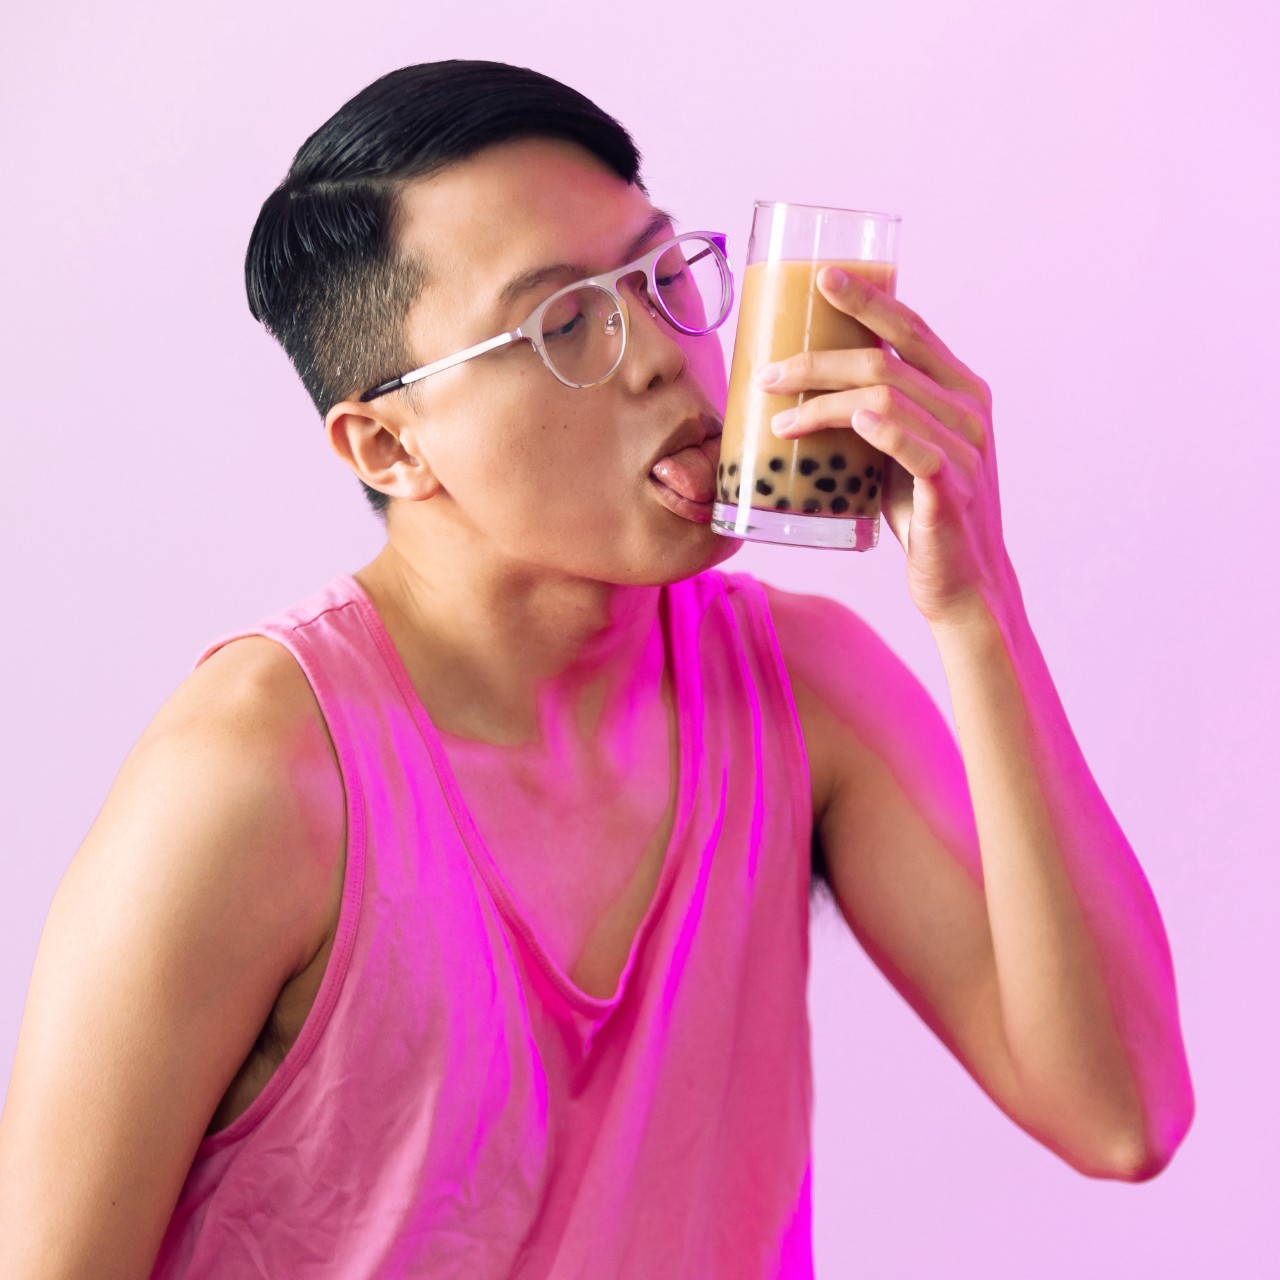 Oliver Wong Brings Sexiness & Comedy to His OnlyFans